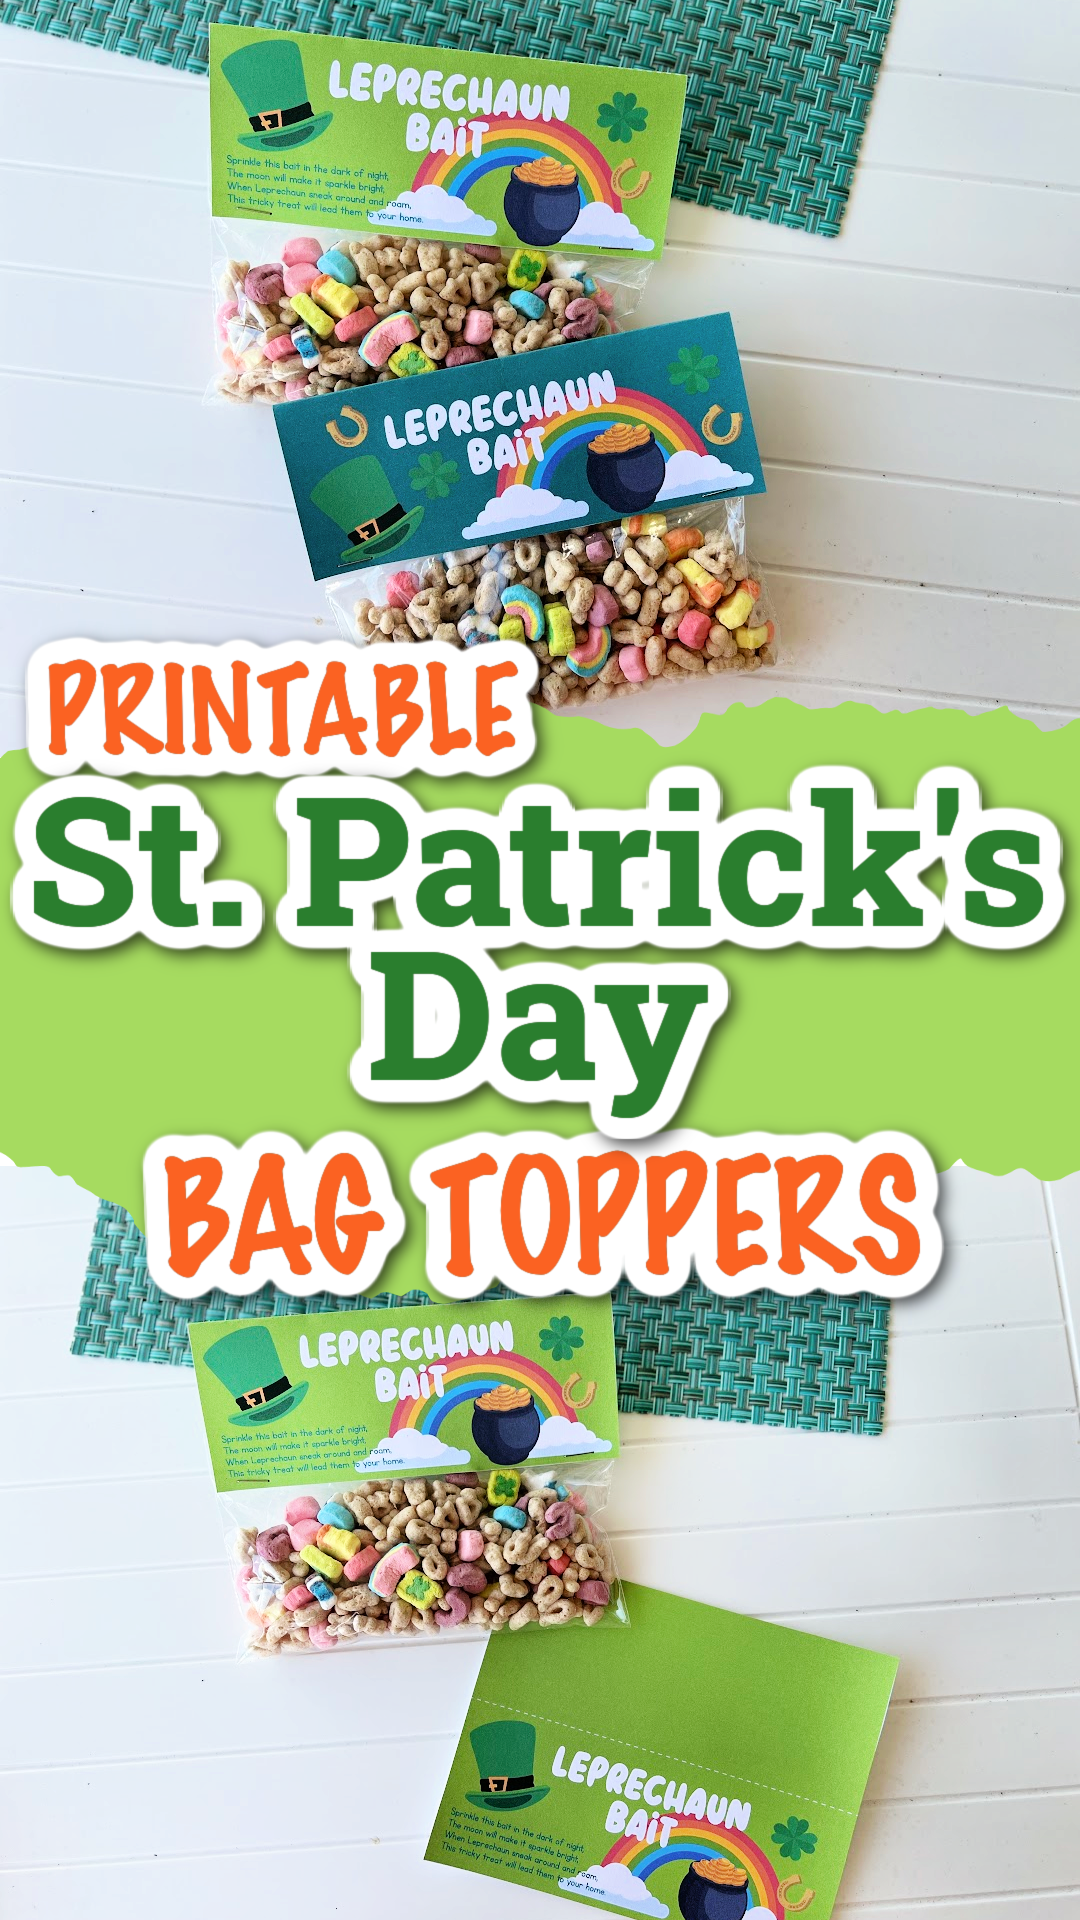 pin image including 2 images for leprechaun bait bag toppers including 2 designs. Lucky Charms are in the bags.